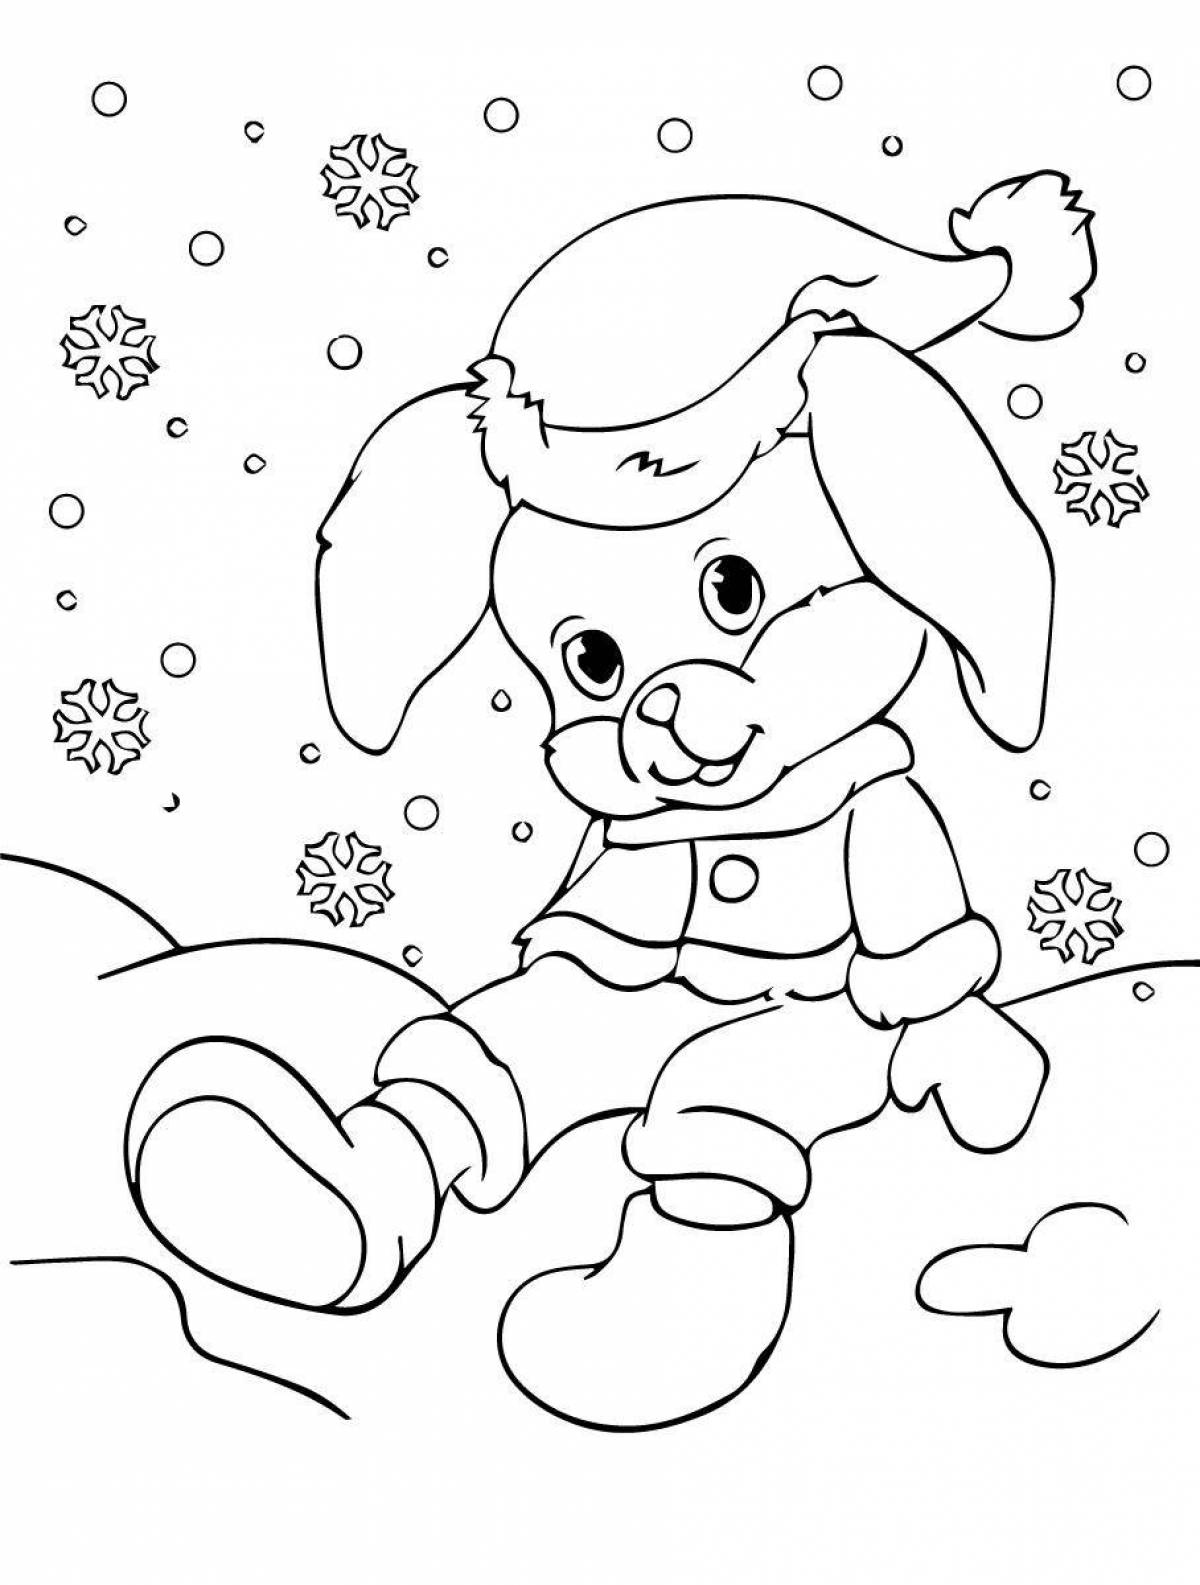 Soft coloring rabbit in winter